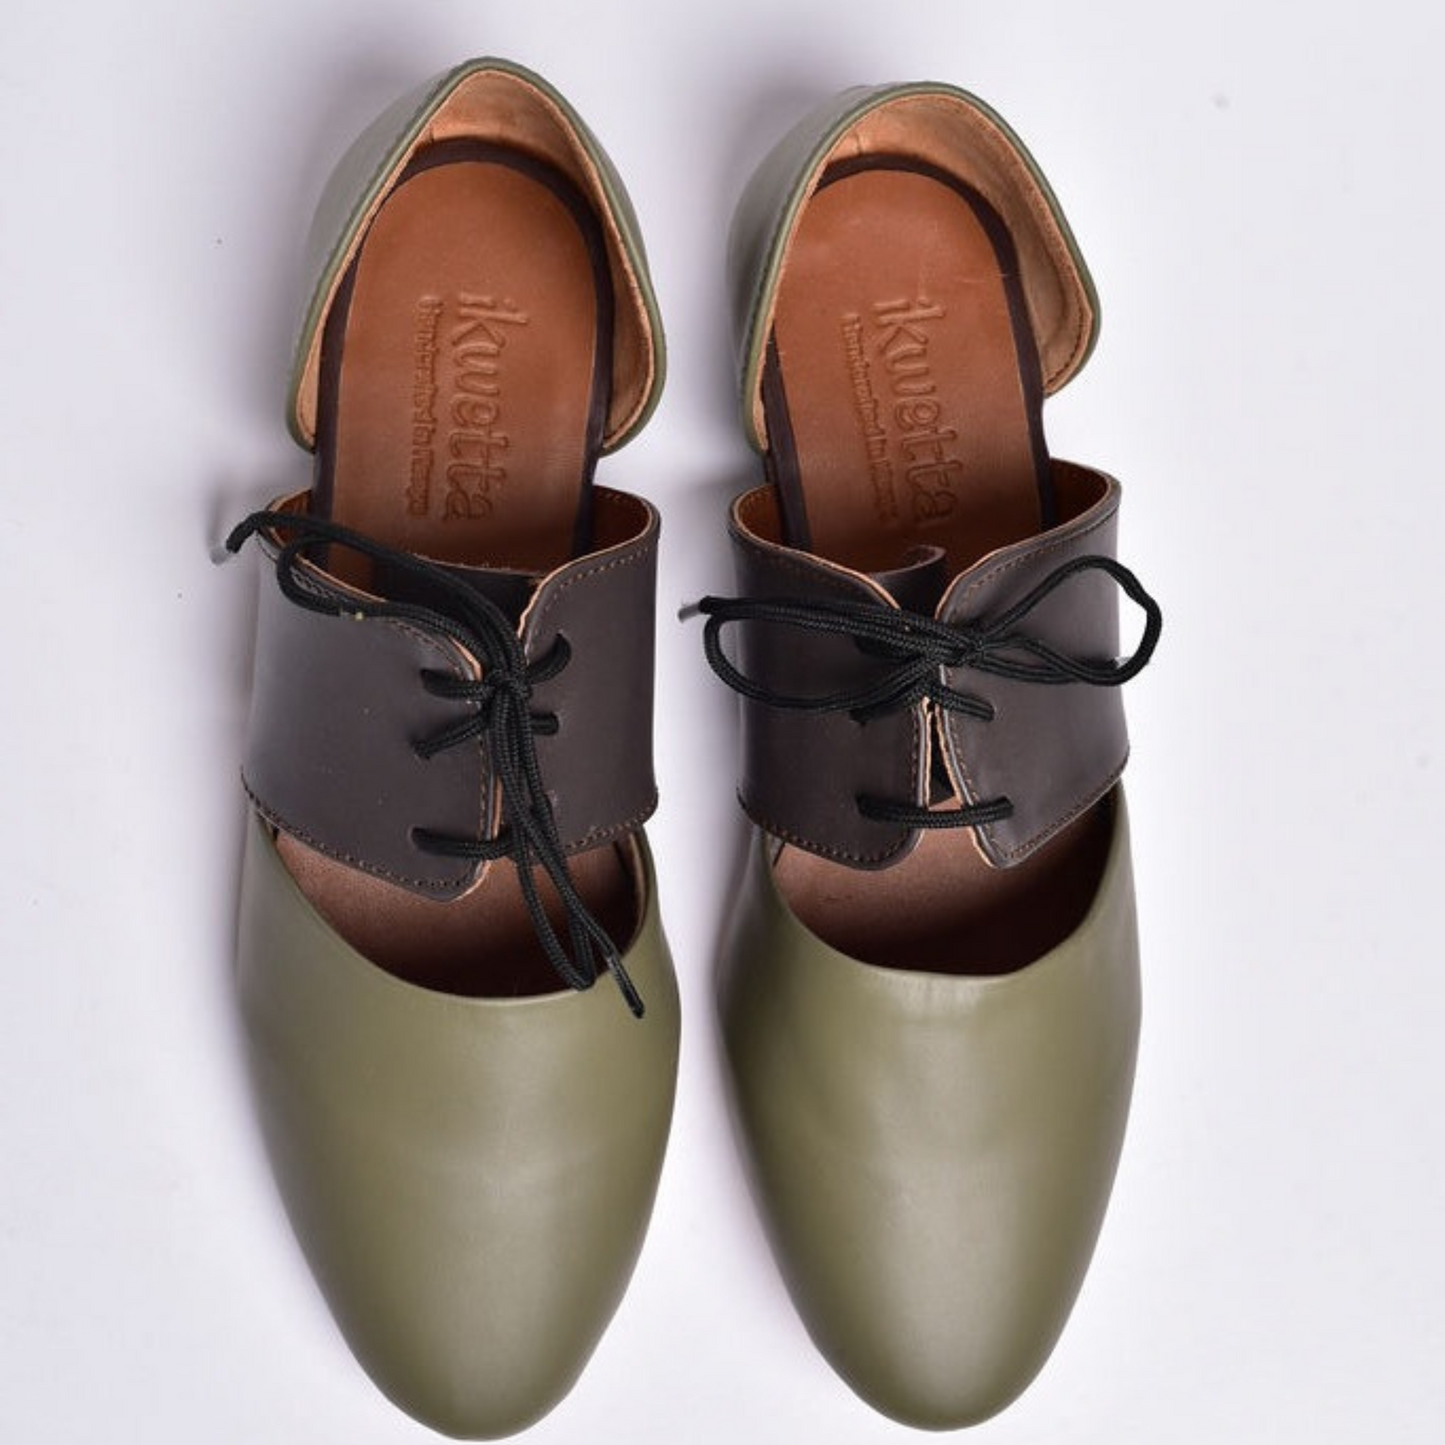 Kay shoes in olive and brown smooth leather